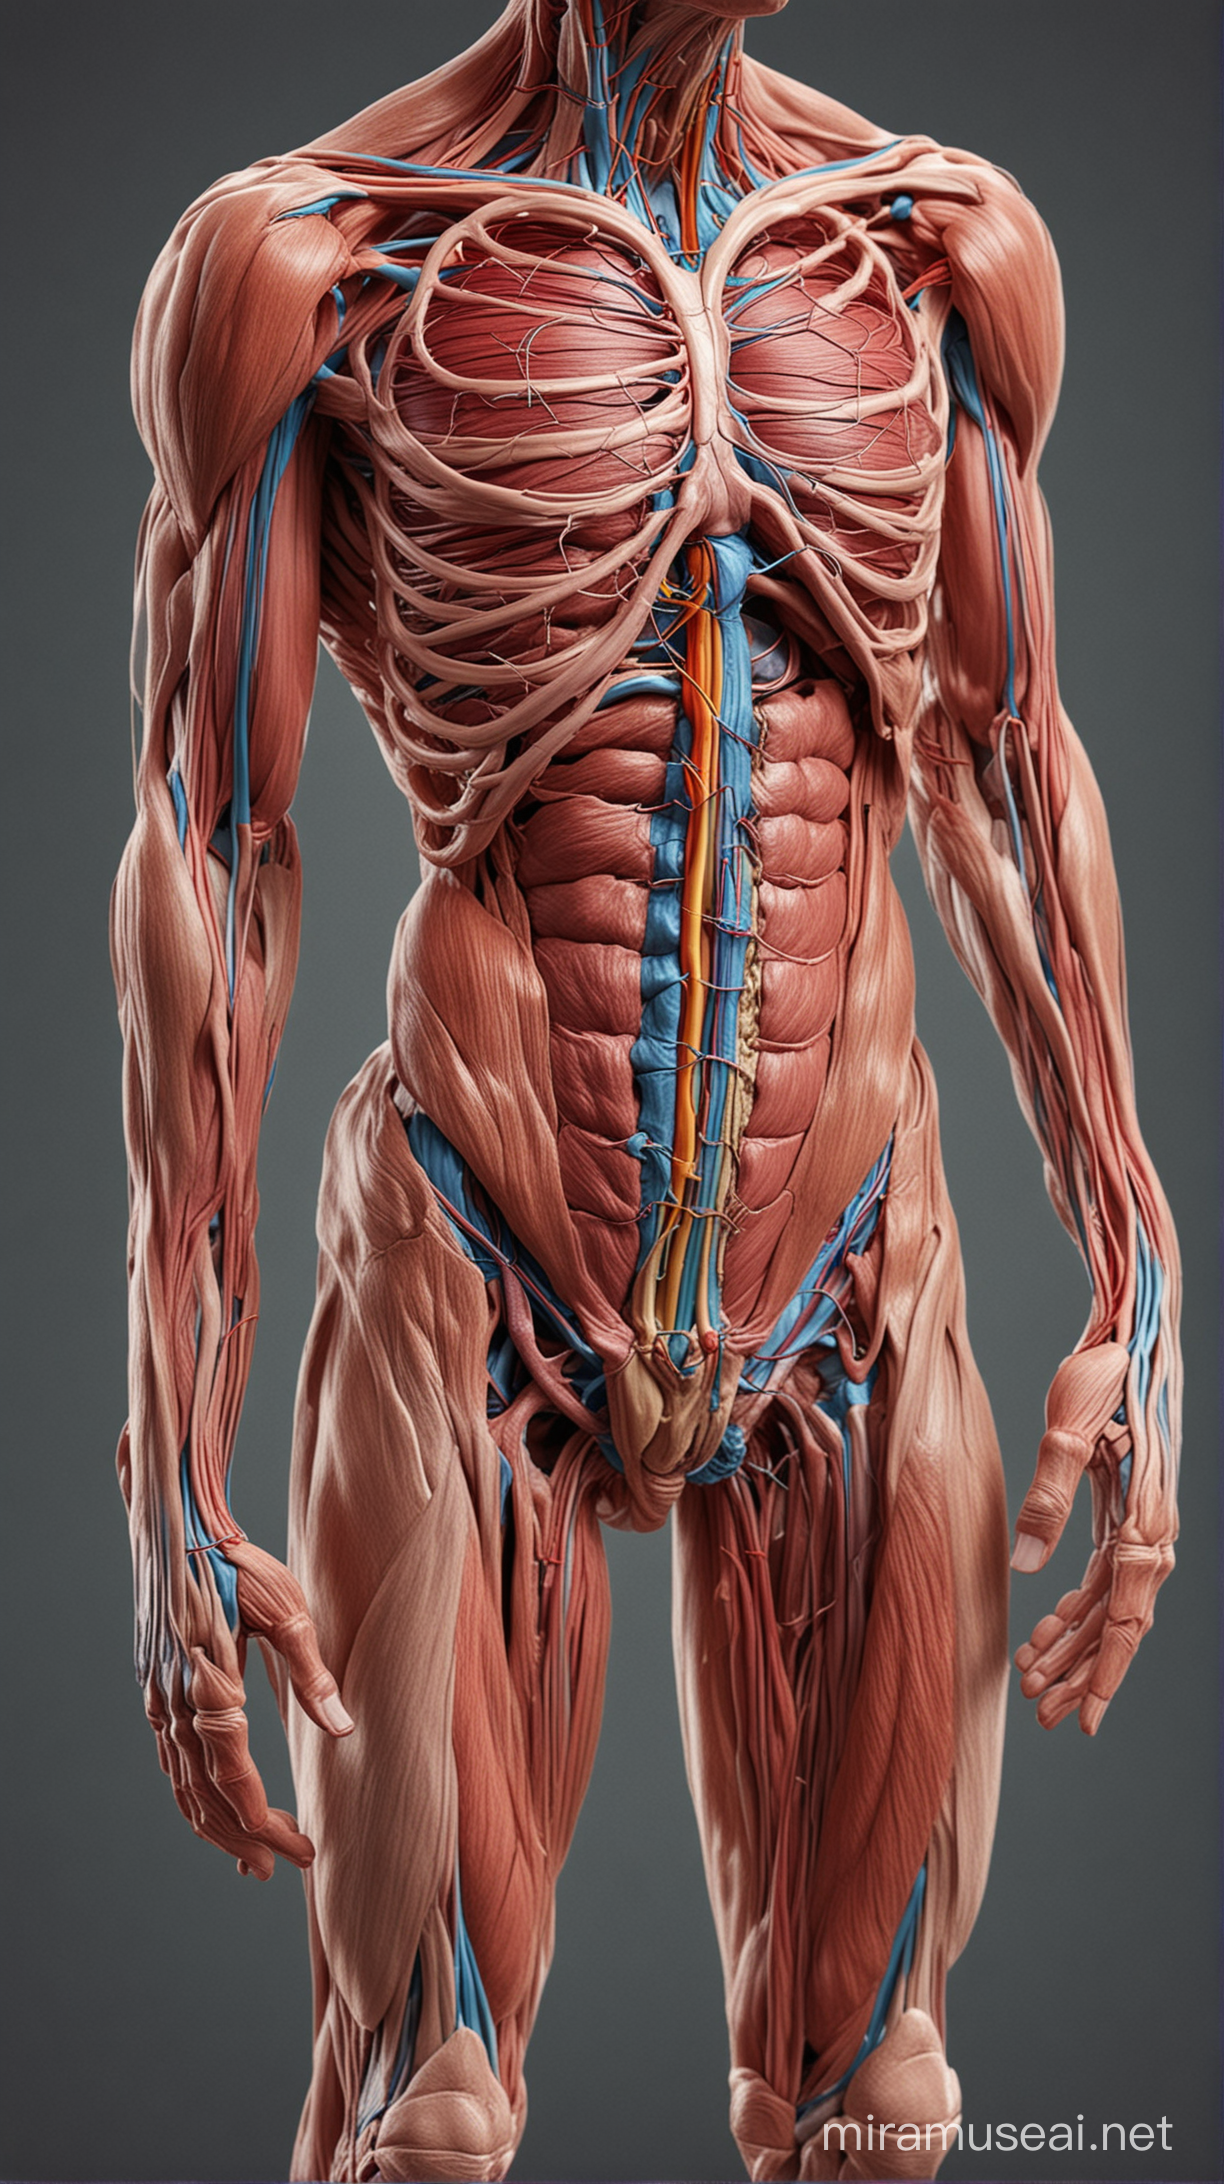 Vibrant Modern Human Anatomy Illustrations Highlighting Cardiovascular Nervous and Muscular Systems